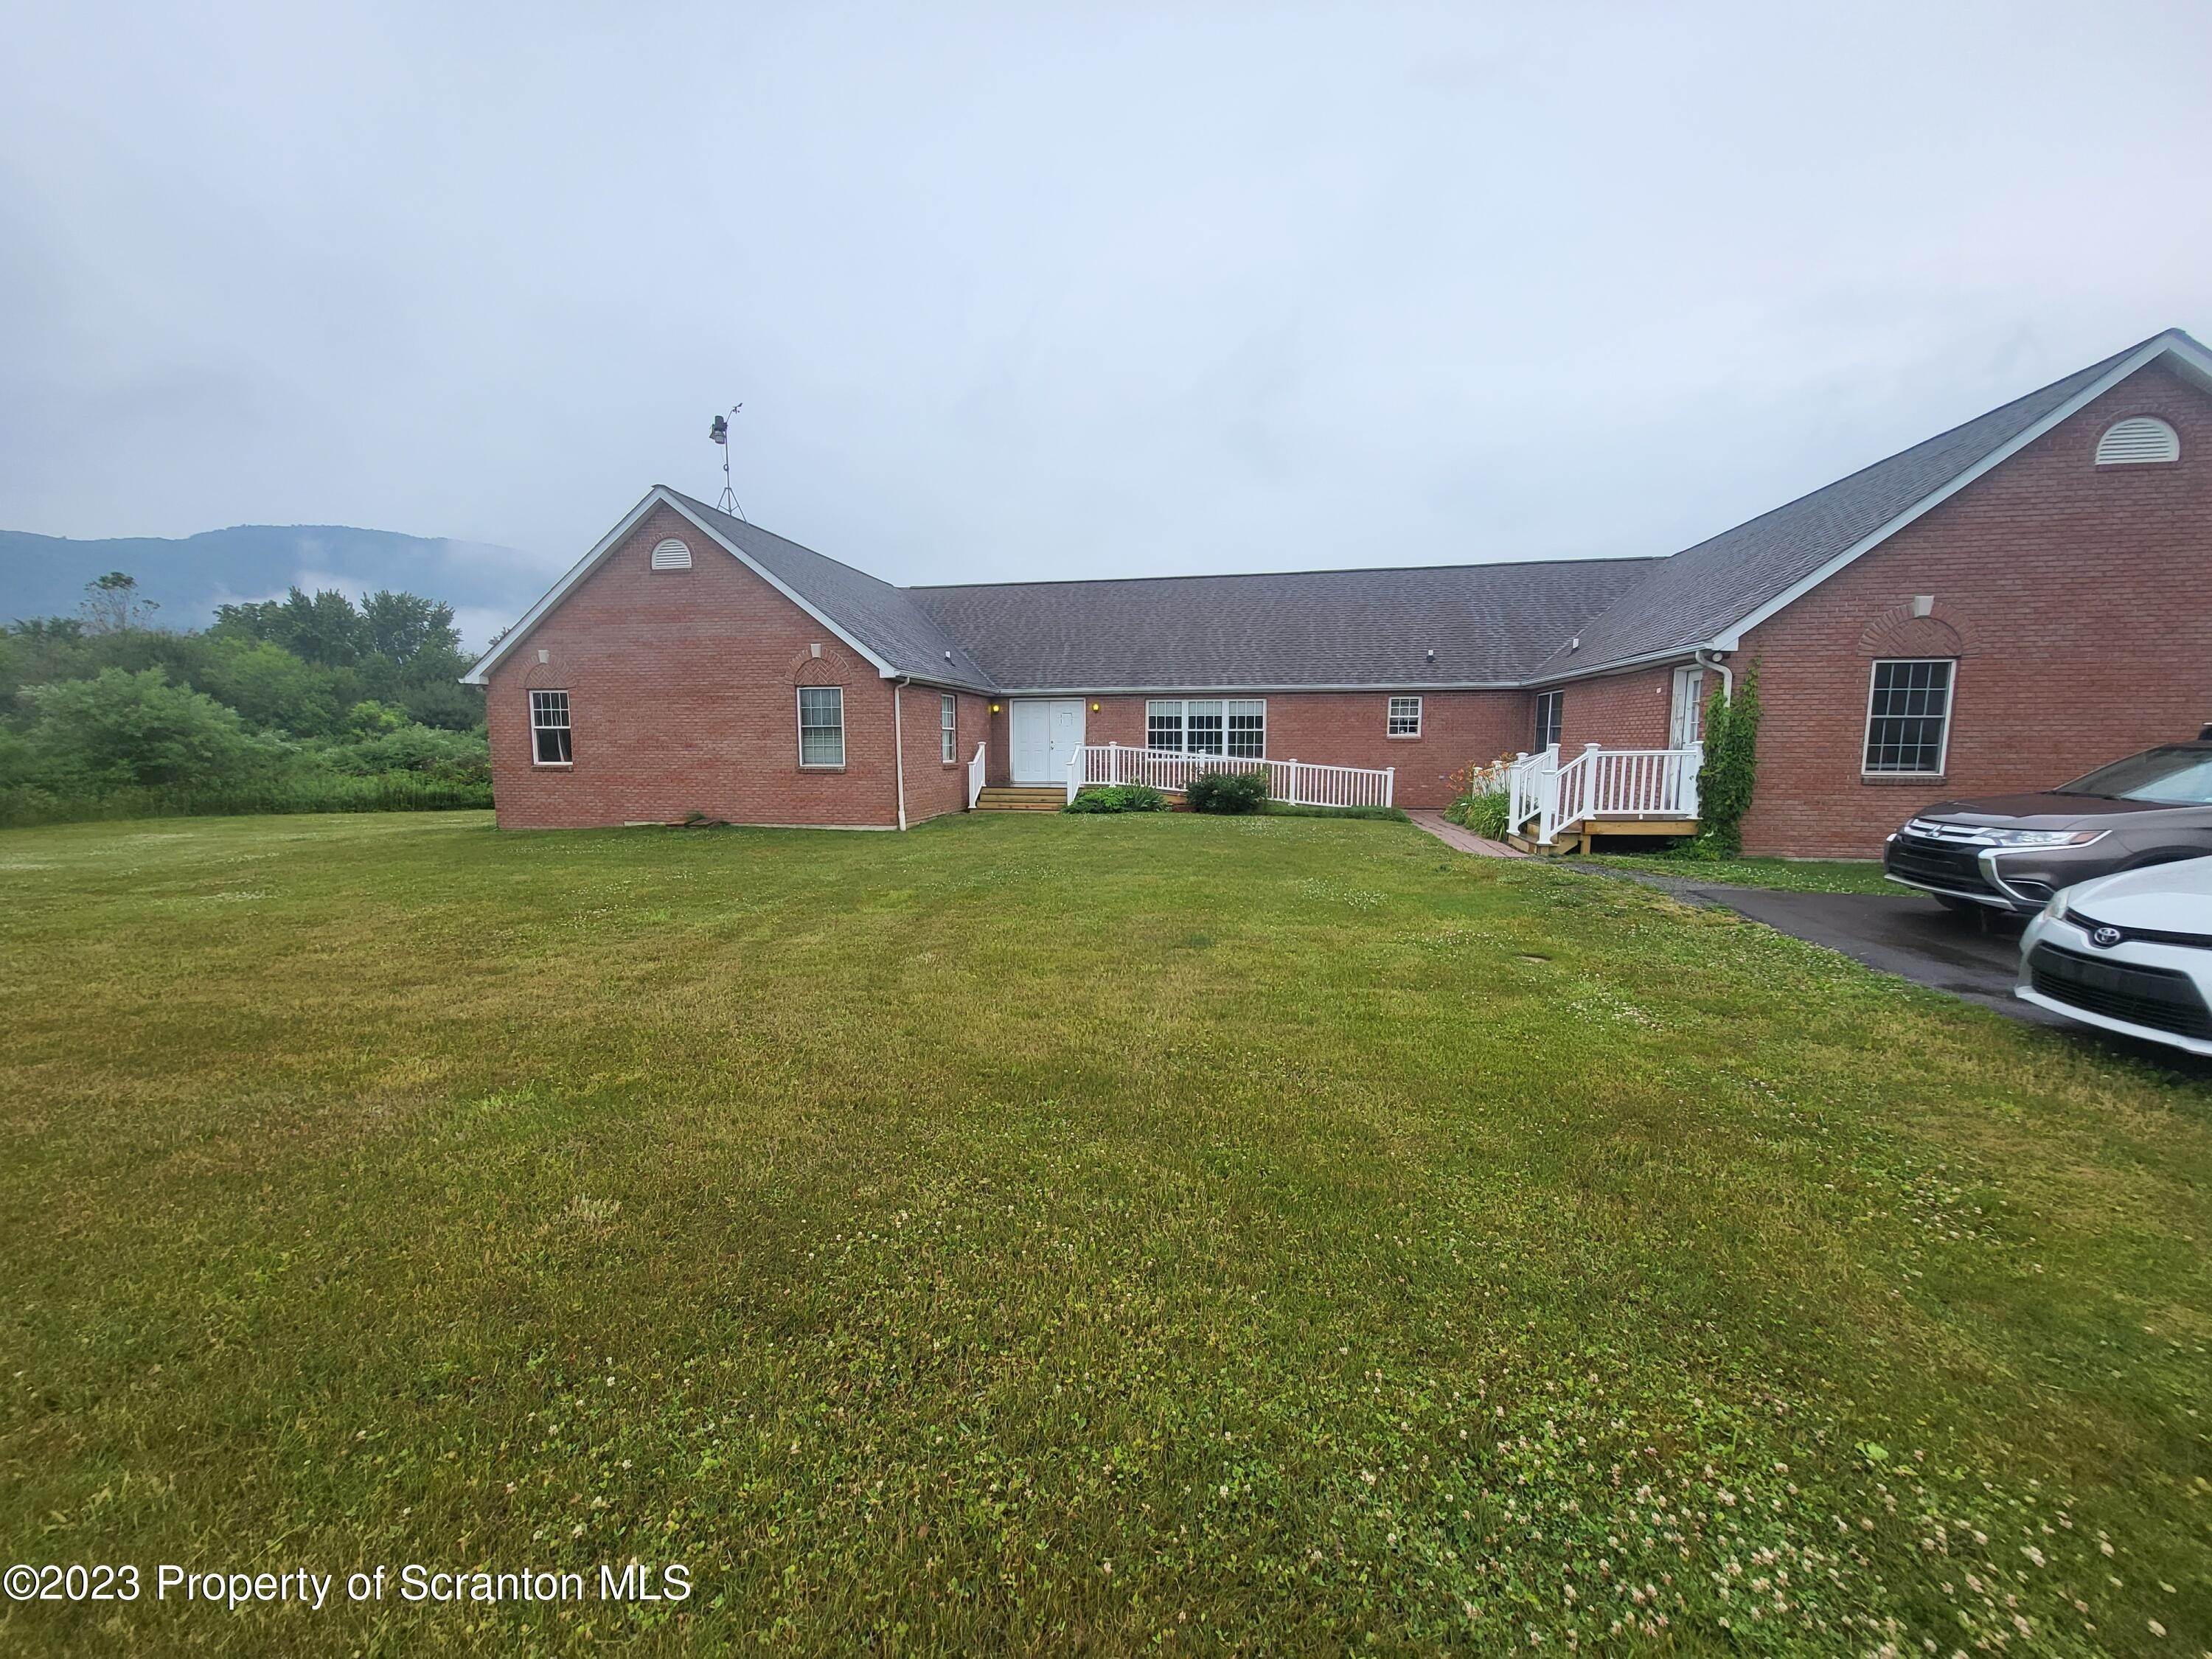 Commercial for Sale at 219 Wellwood Dr Tunkhannock, Pennsylvania 18657 United States